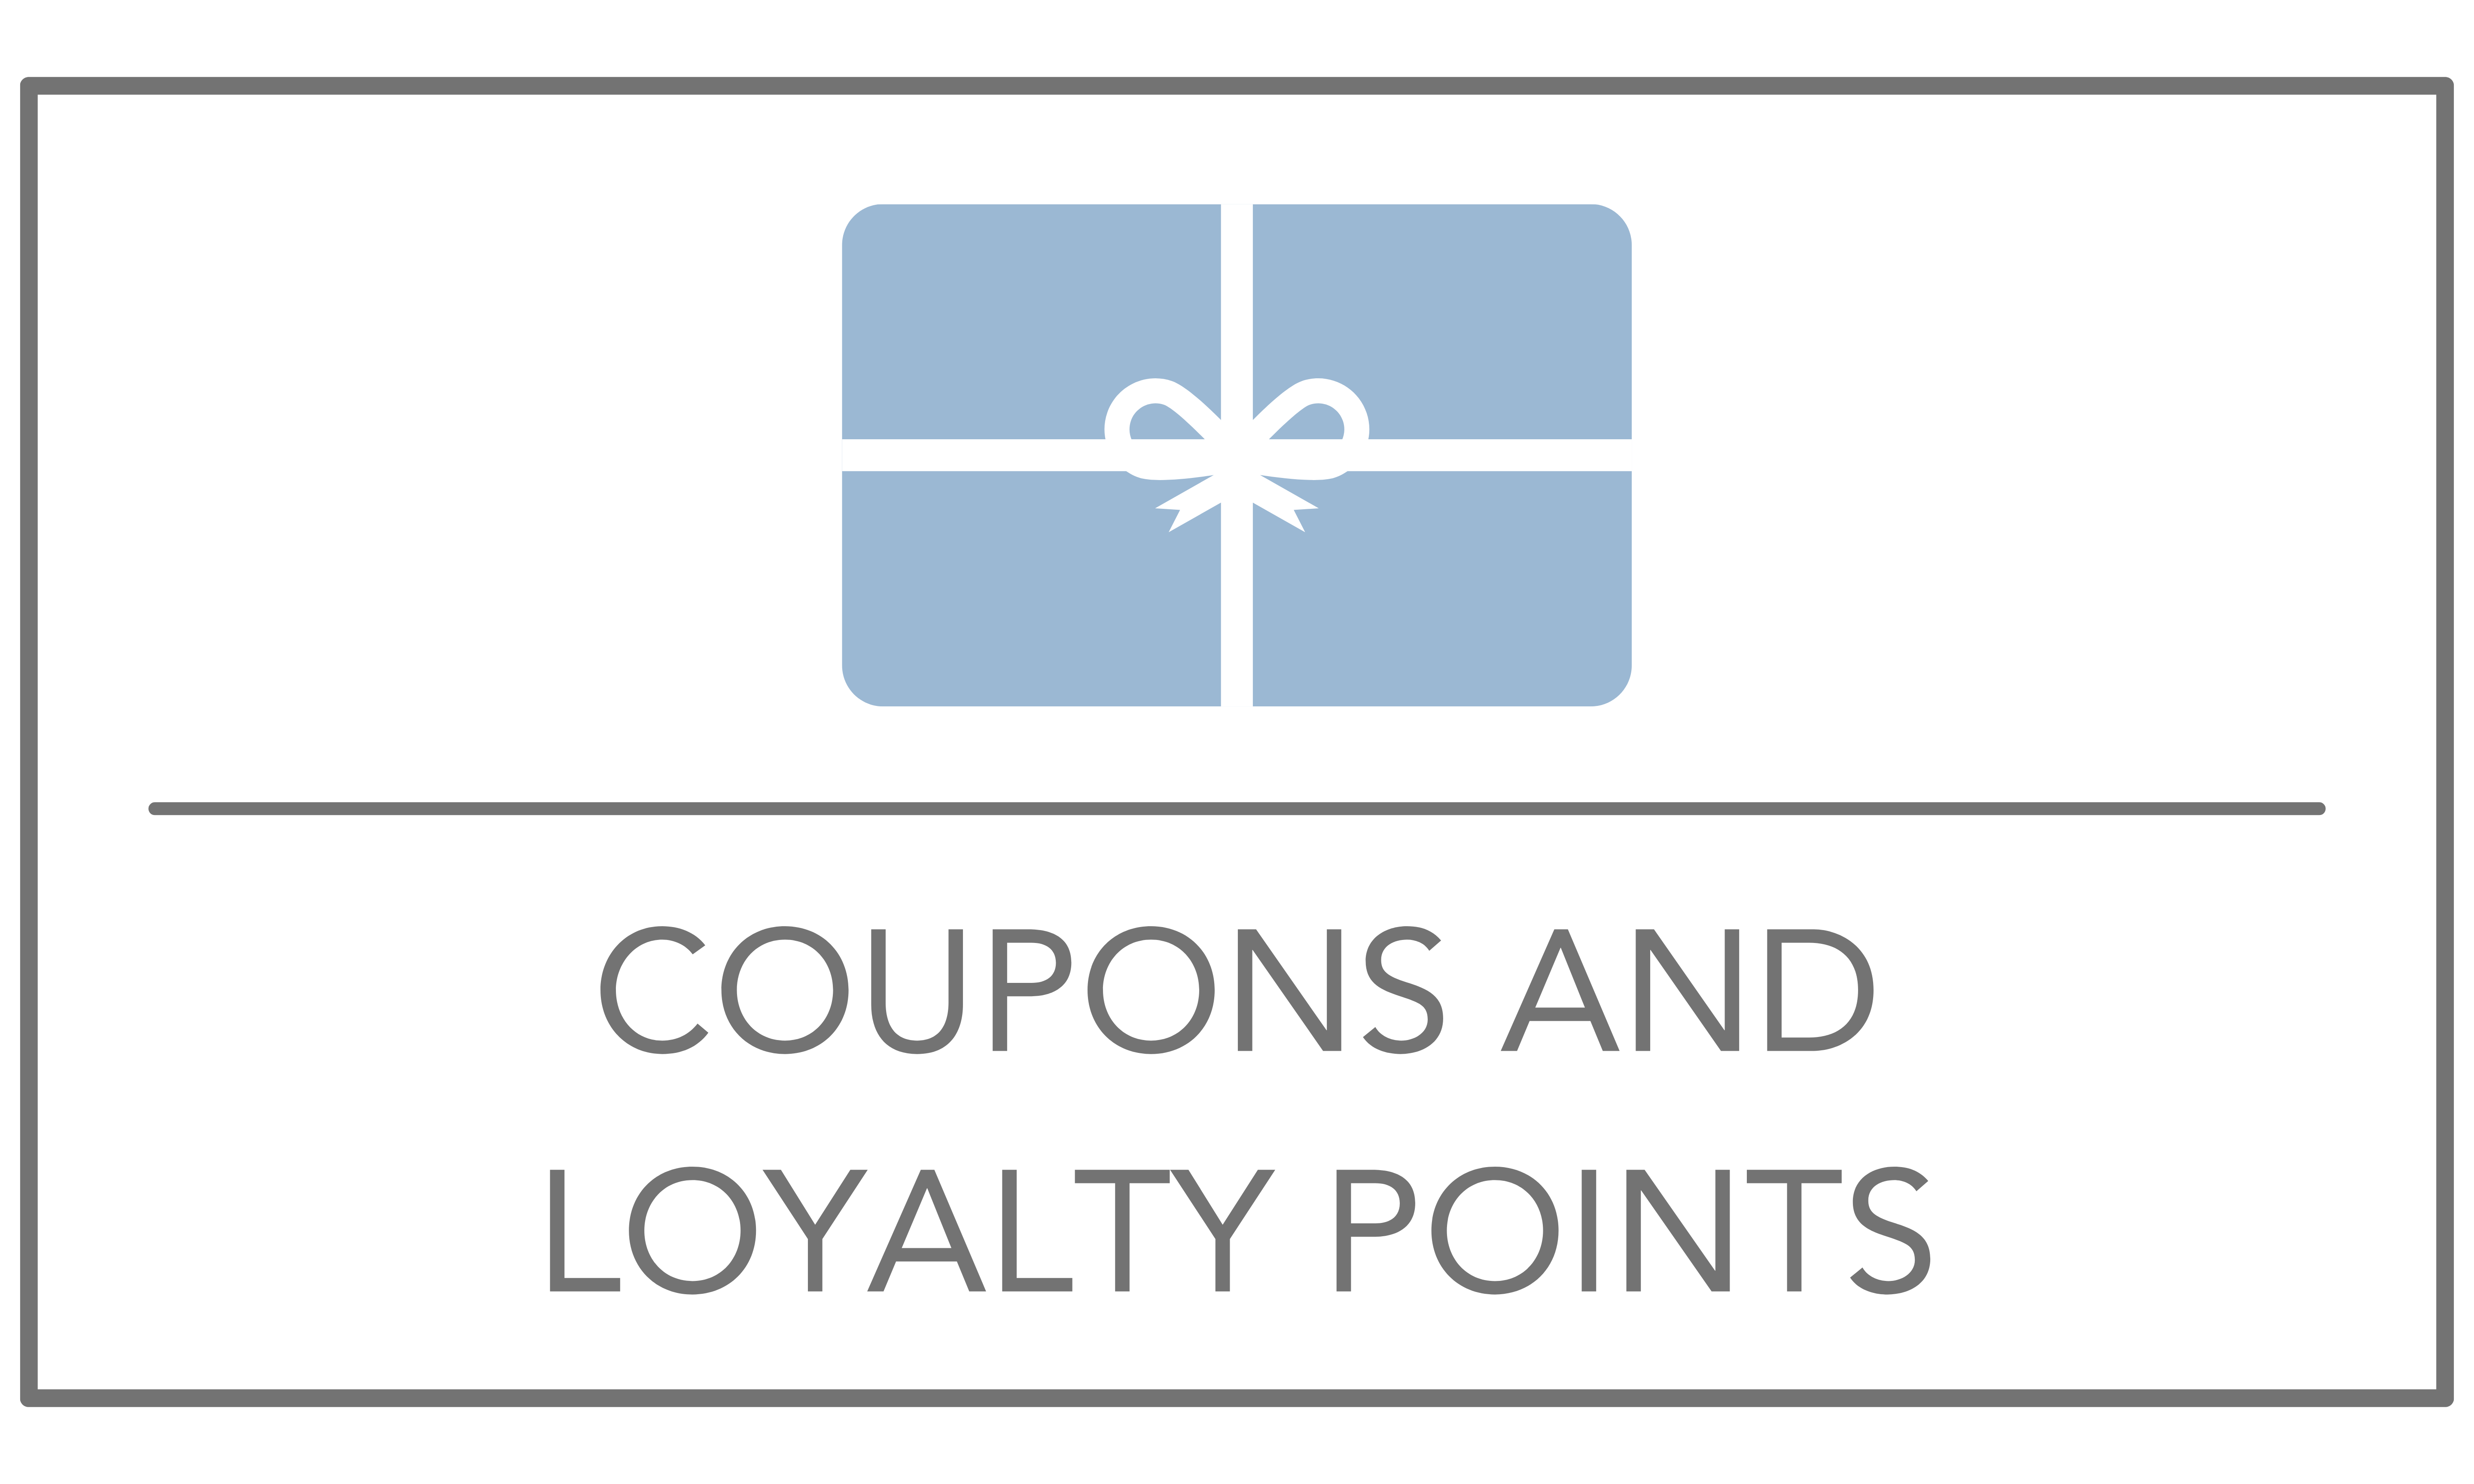 skinius-coupons-and-loyalty-points-faq